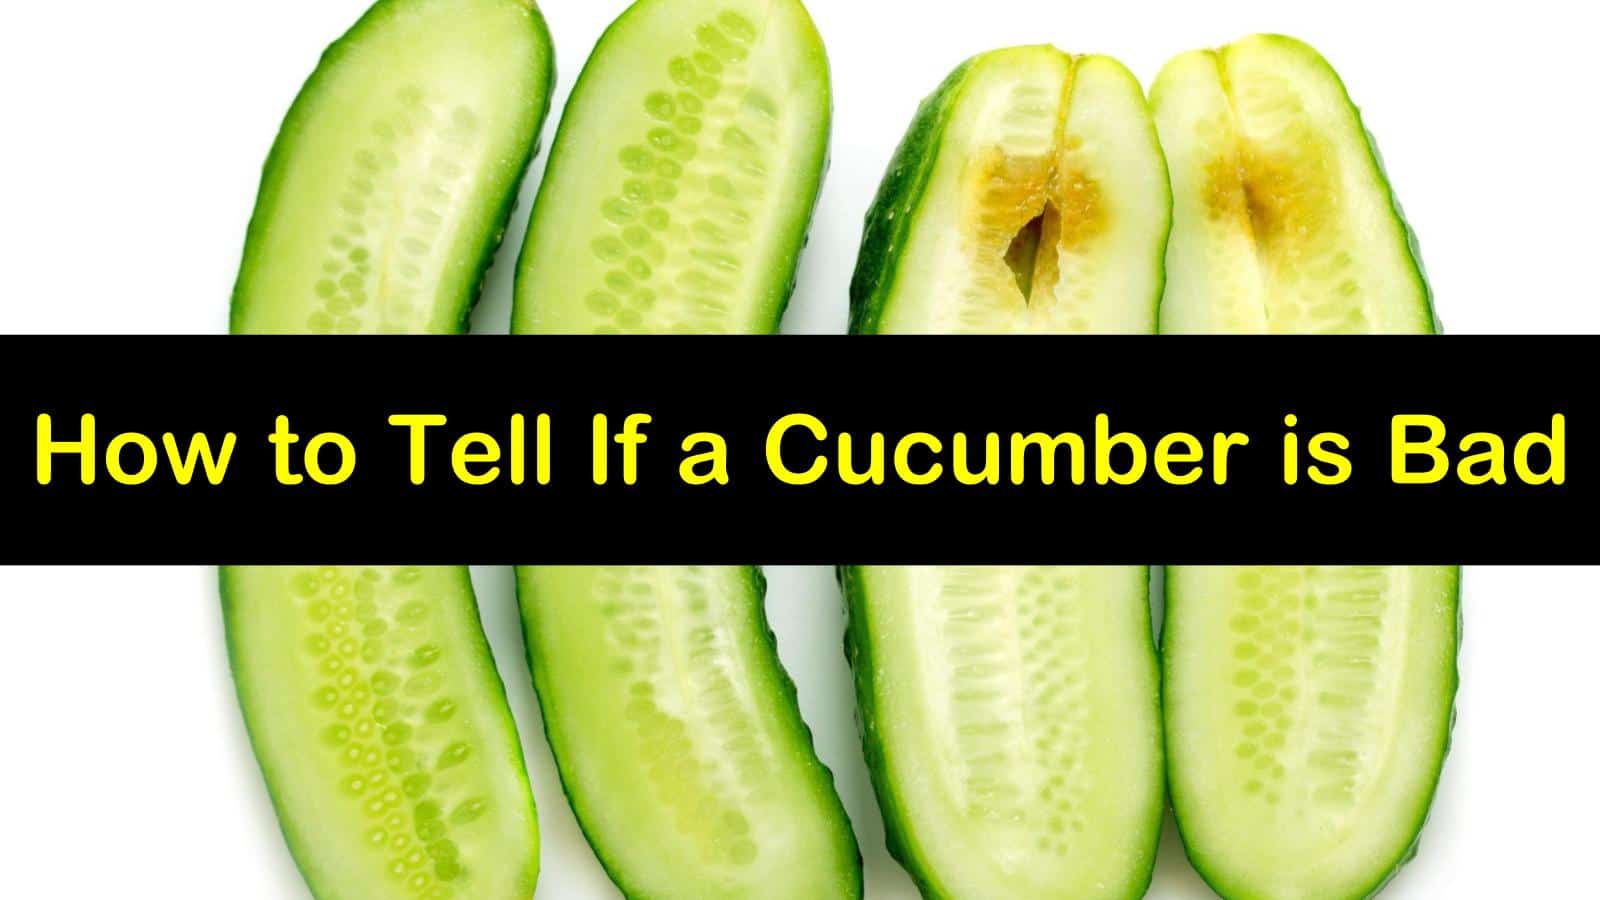 how to tell if a cucumber is bad titleimg1